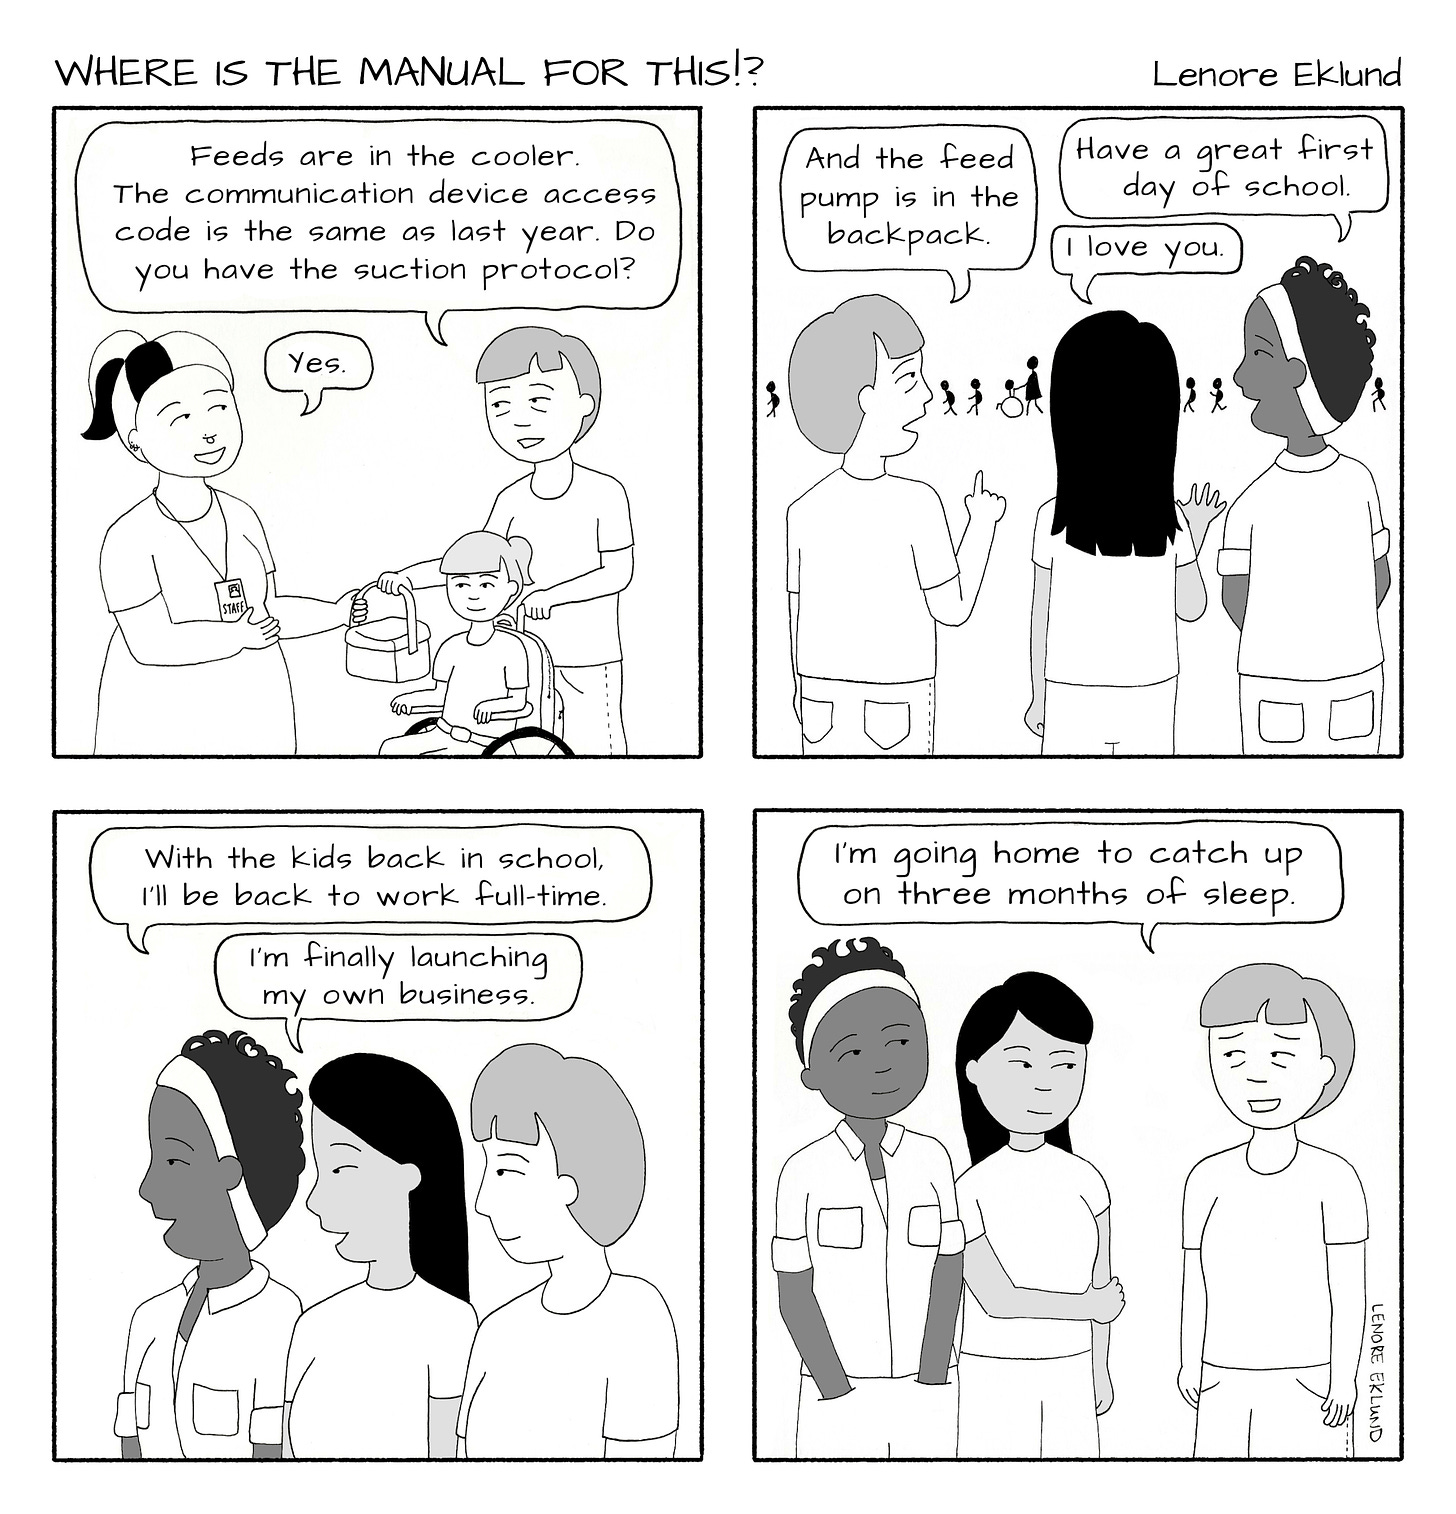 A four-panel line drawing cartoon titled Where is the Manual for This?!. The first panel shows a mom with bags under her eyes handing a bag to a school staffer and pushing her daughter in a wheelchair. The mom says: “Feeds are in the cooler. The communication device access code is the same as last year. Do you have the suction protocol?” “Yes,” replies the staffer. In the second panel, the tired mom is standing with two other moms while the children walk in a line in the background. The tired mom yells: “And the feed pump is in the backpack.” The second mom yells “I love you.” The third mom yells: “Have a great first day of school.” In the third panel, the third mom says to the other moms: “With the kid back in school, I’ll be back to work full-time.” The second mom says “I’m finally launching my own business.” In the final panel, the tired mom says: “I’m going home to catch up on three months of sleep.” 